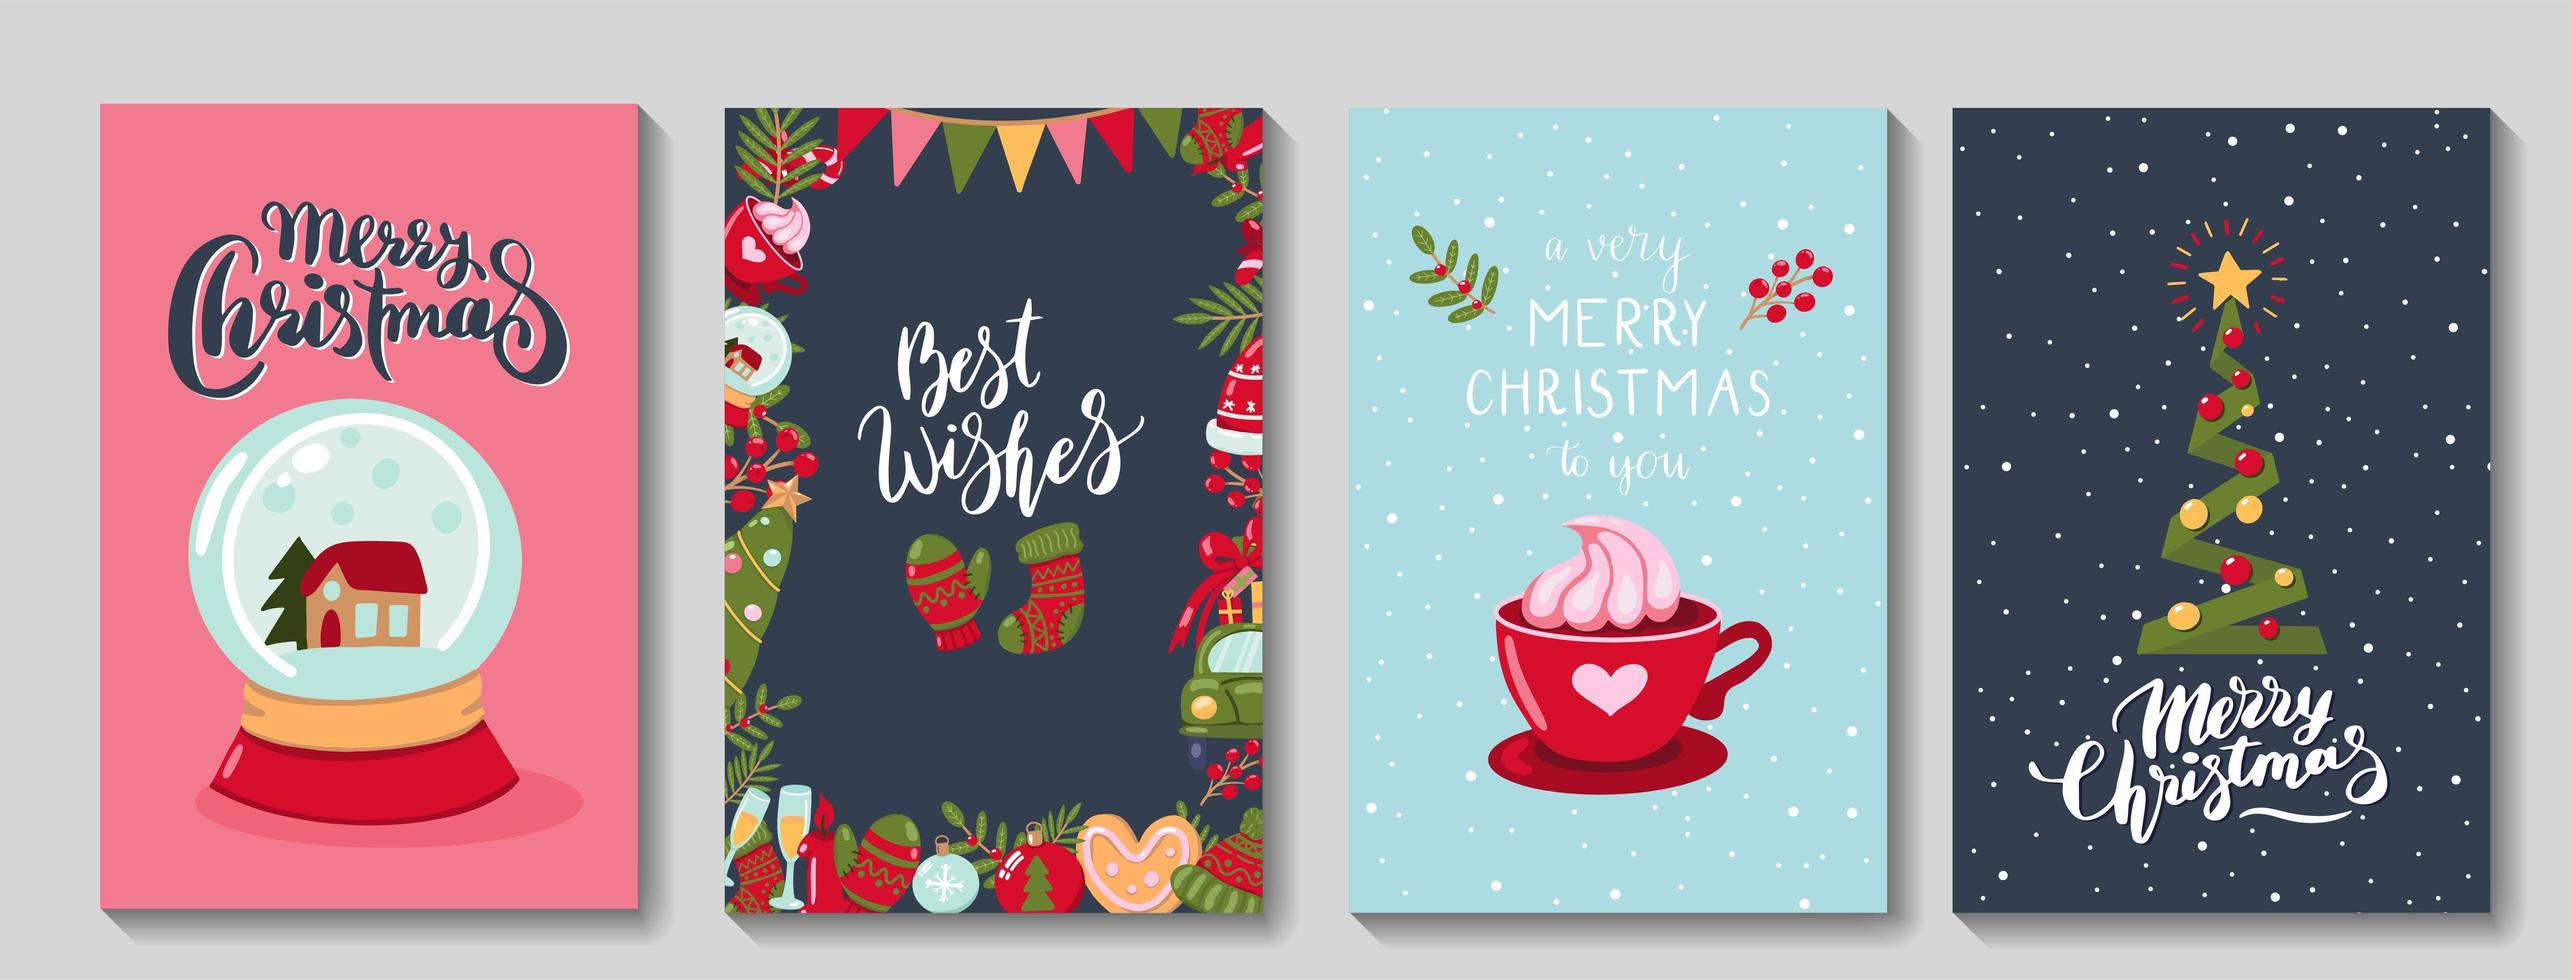 Set of Merry Christmas Greeting Cards vector